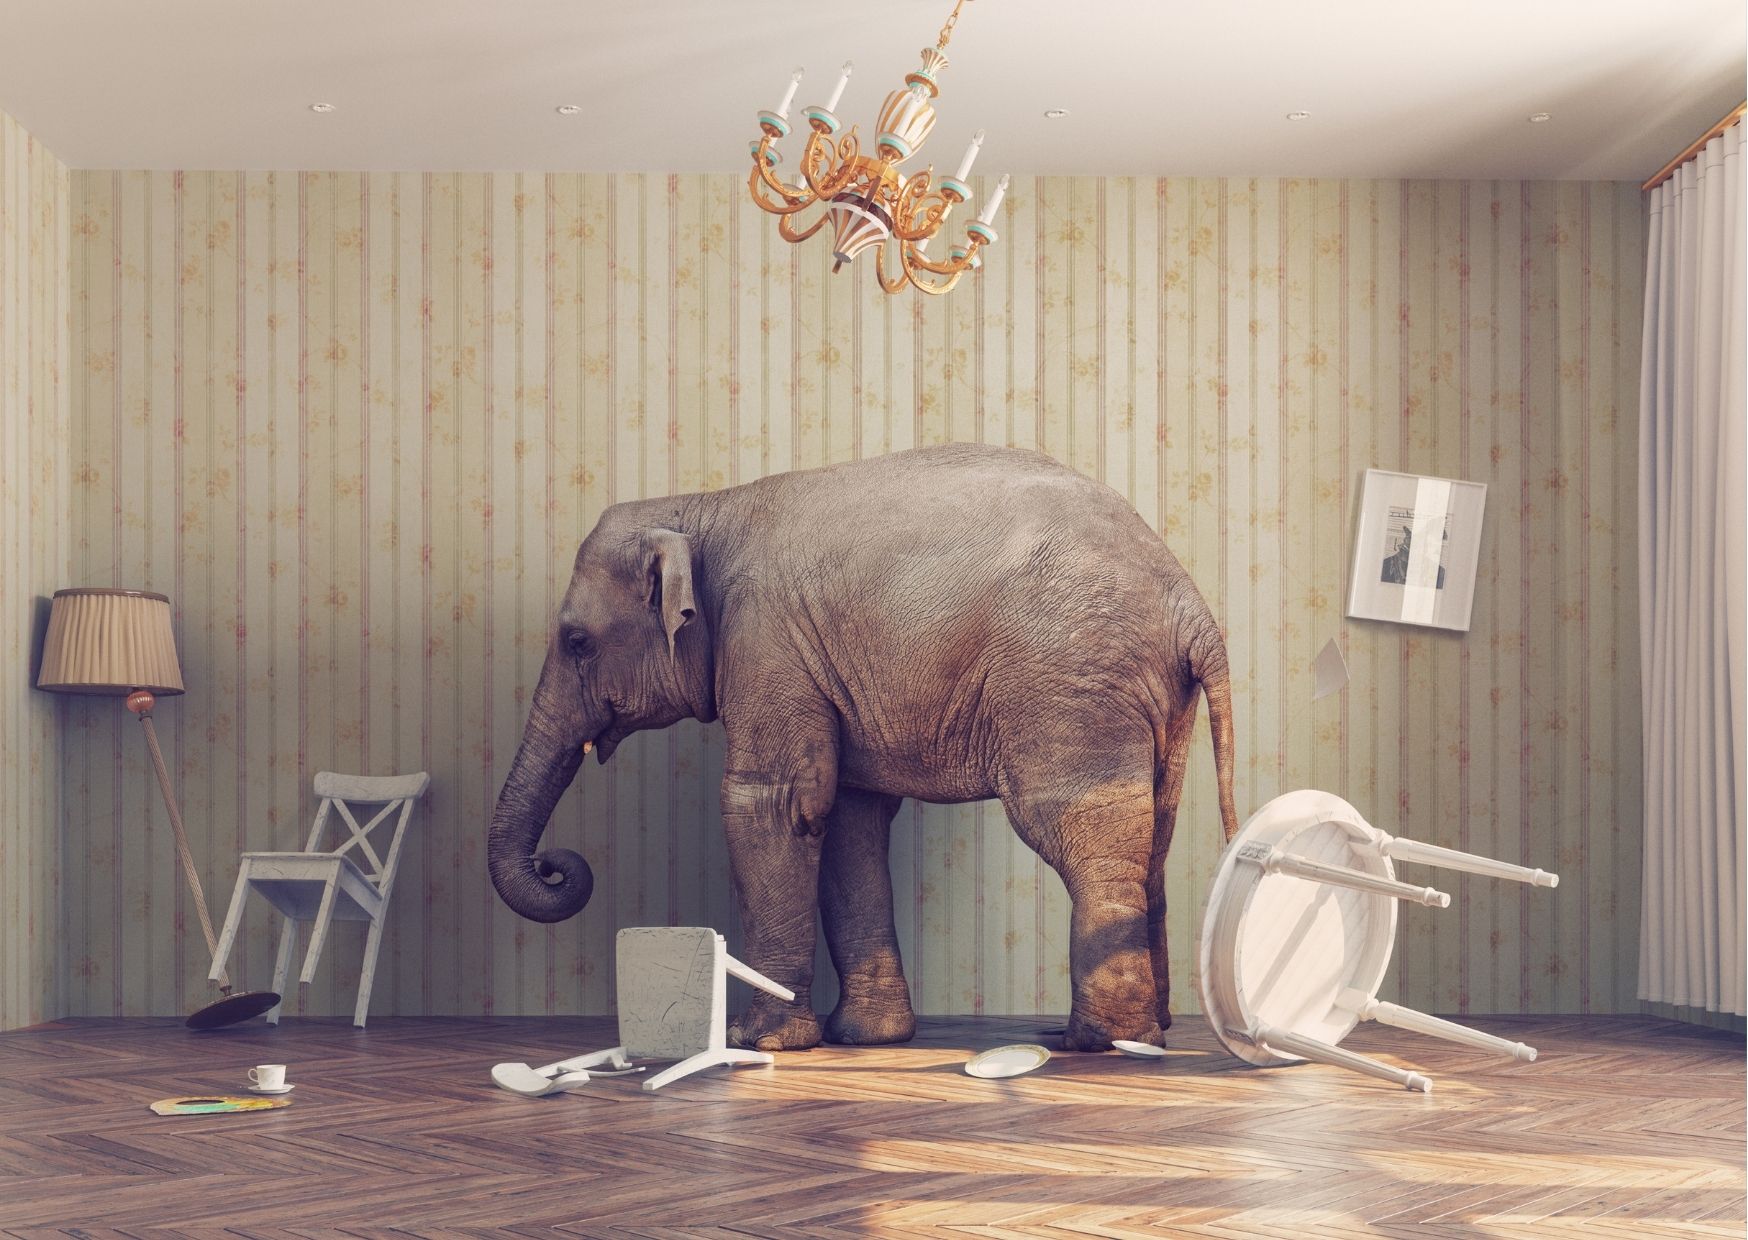 A picture of an elephant in the room